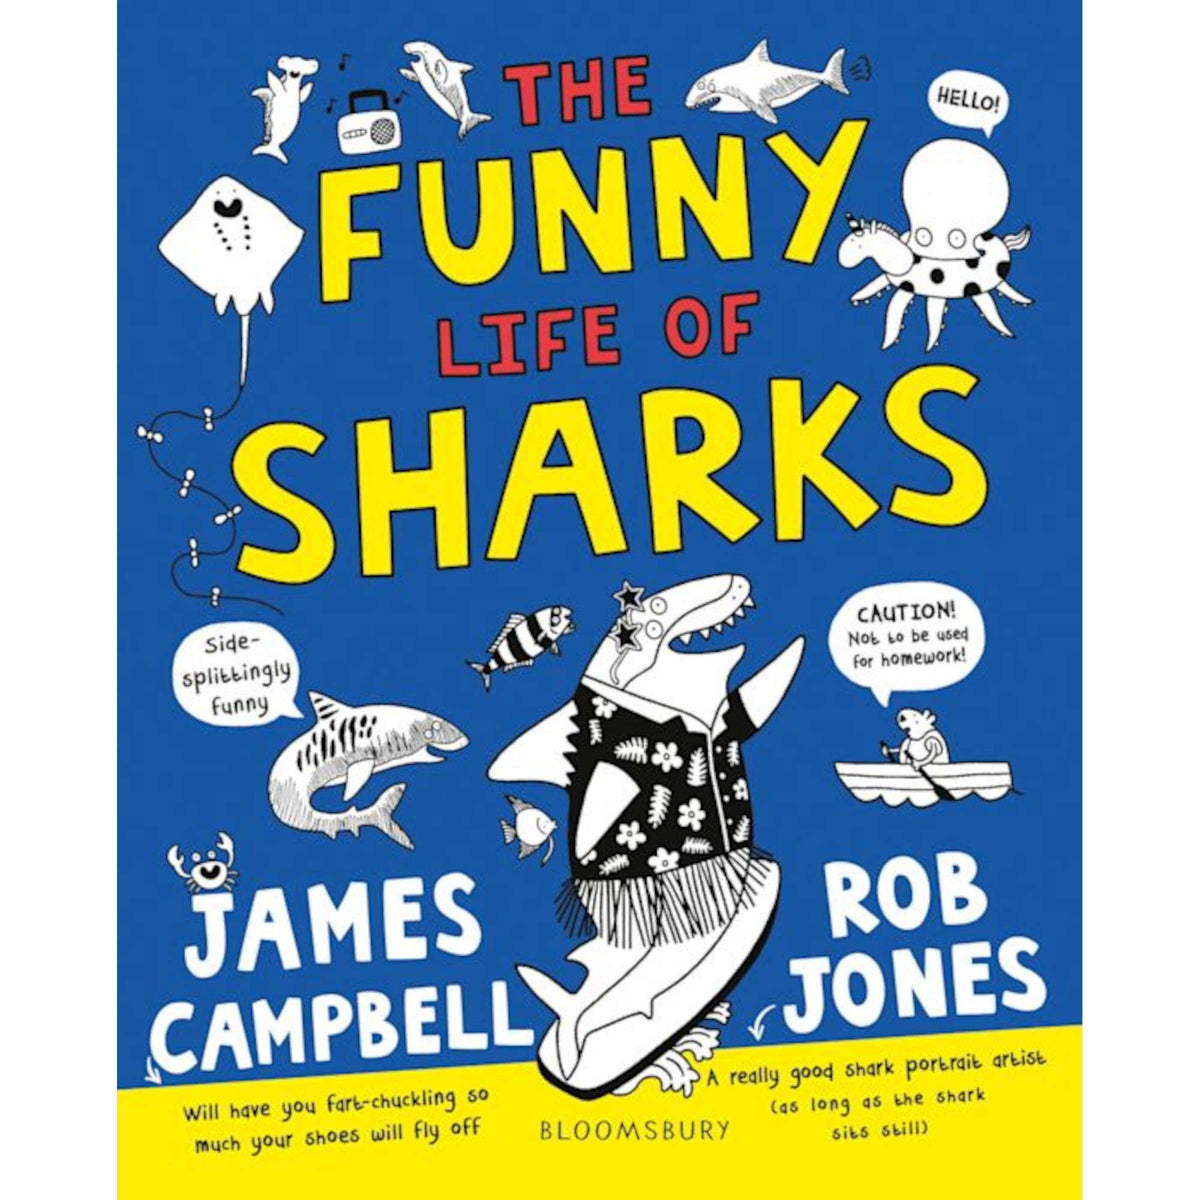 The Funny Life of Sharks